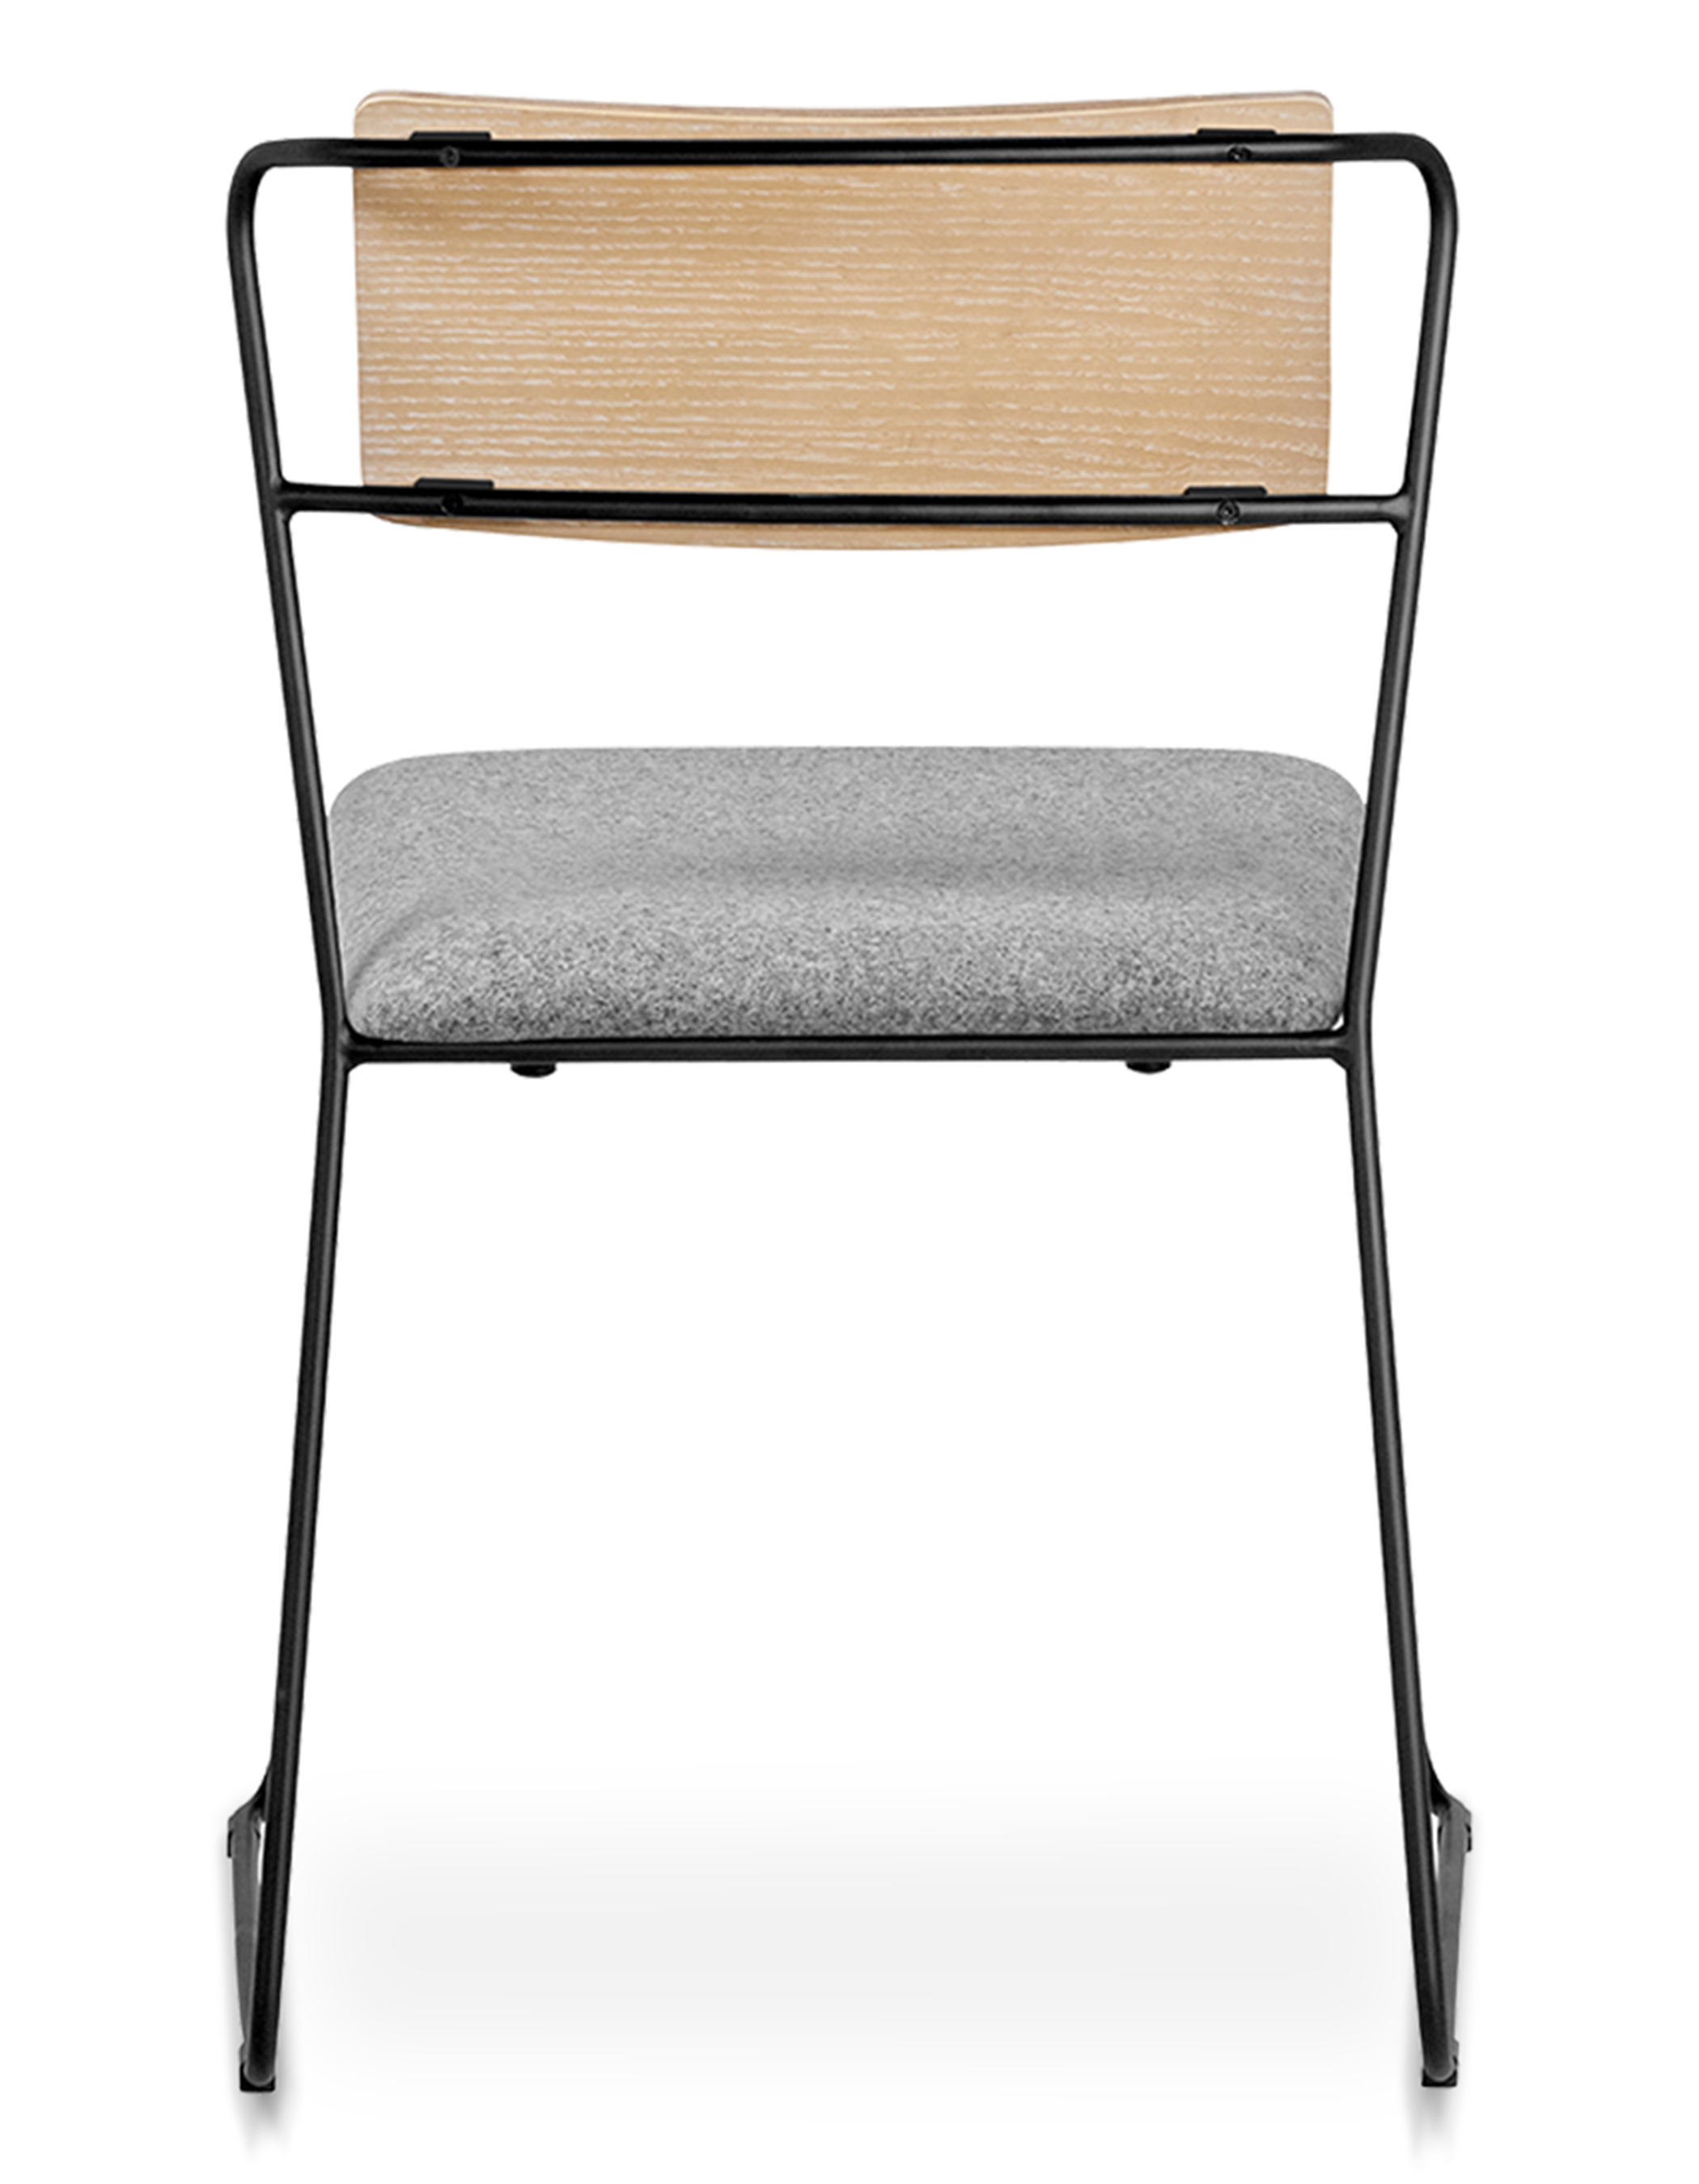 WS - Transit chair - Seat Upholstery (Back)